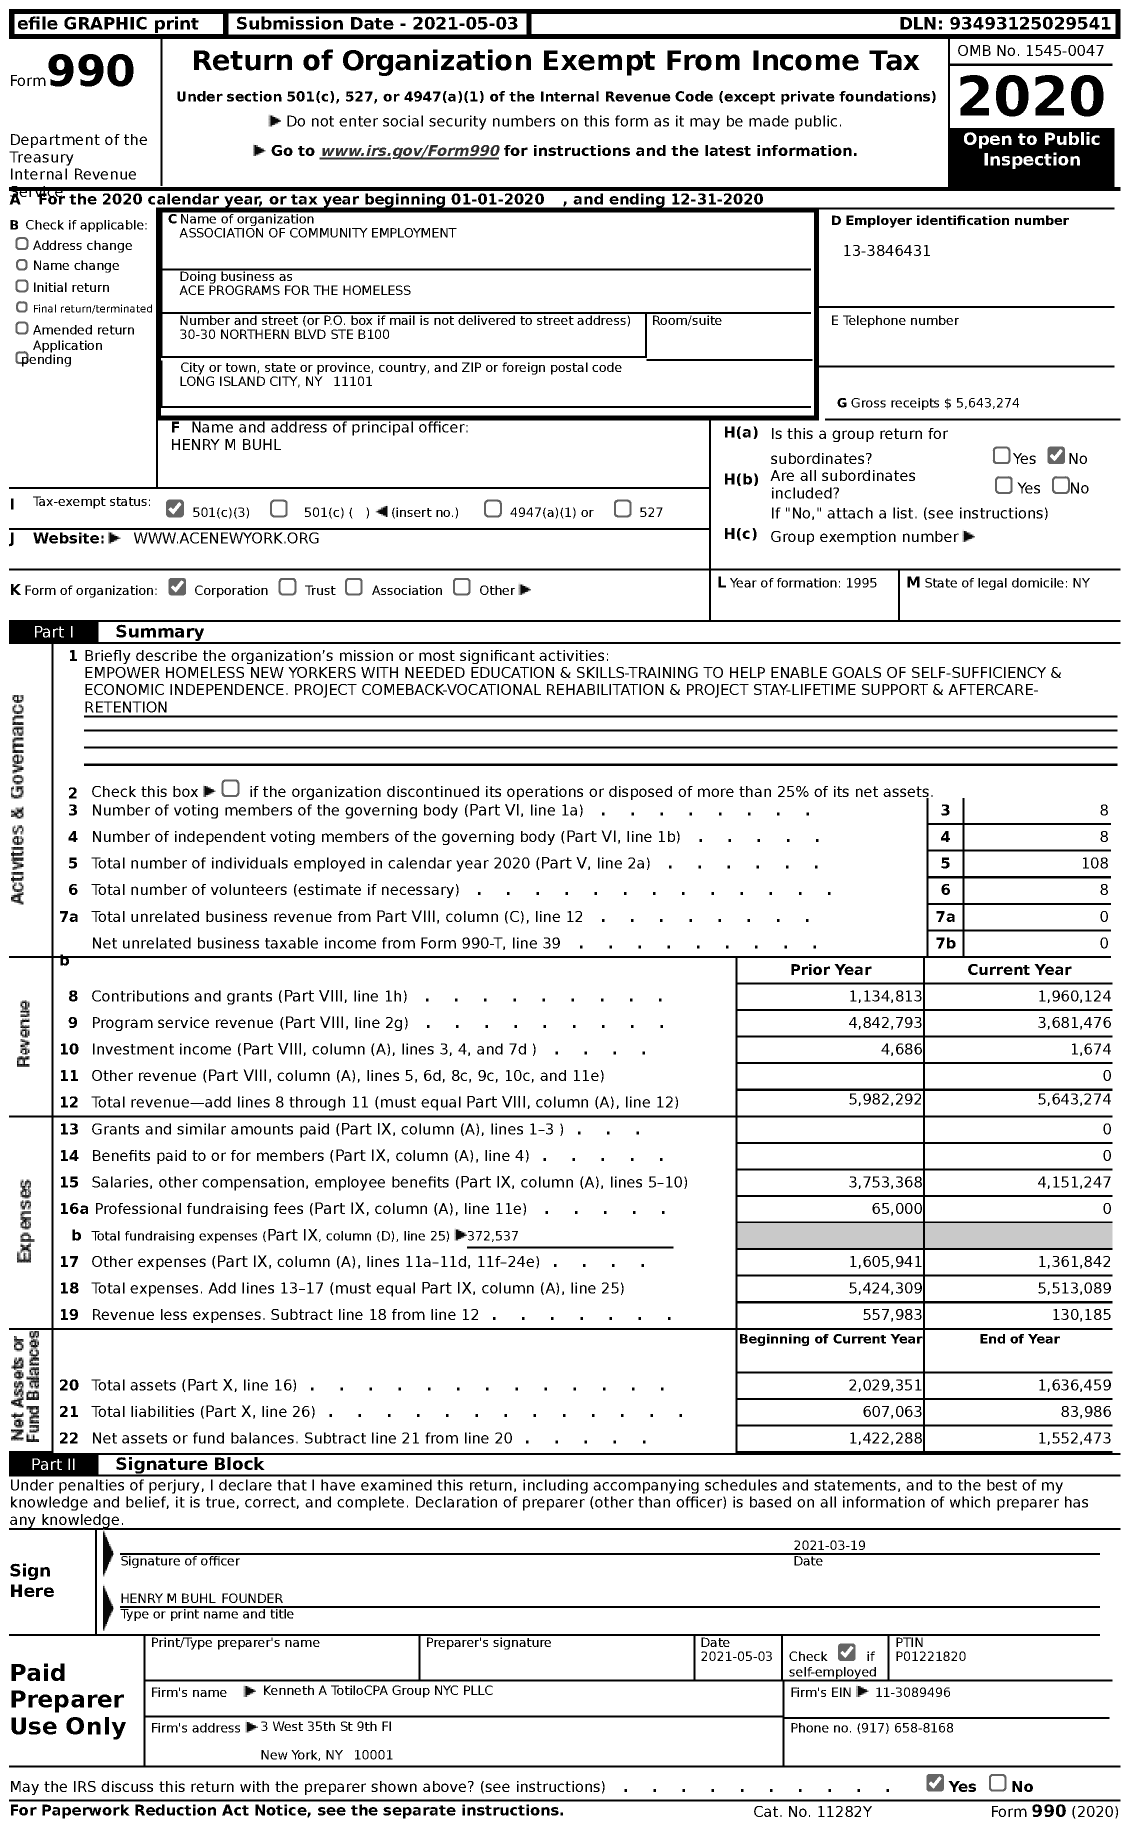 Image of first page of 2020 Form 990 for Association of Community Employment Ace Programs for the Homeless